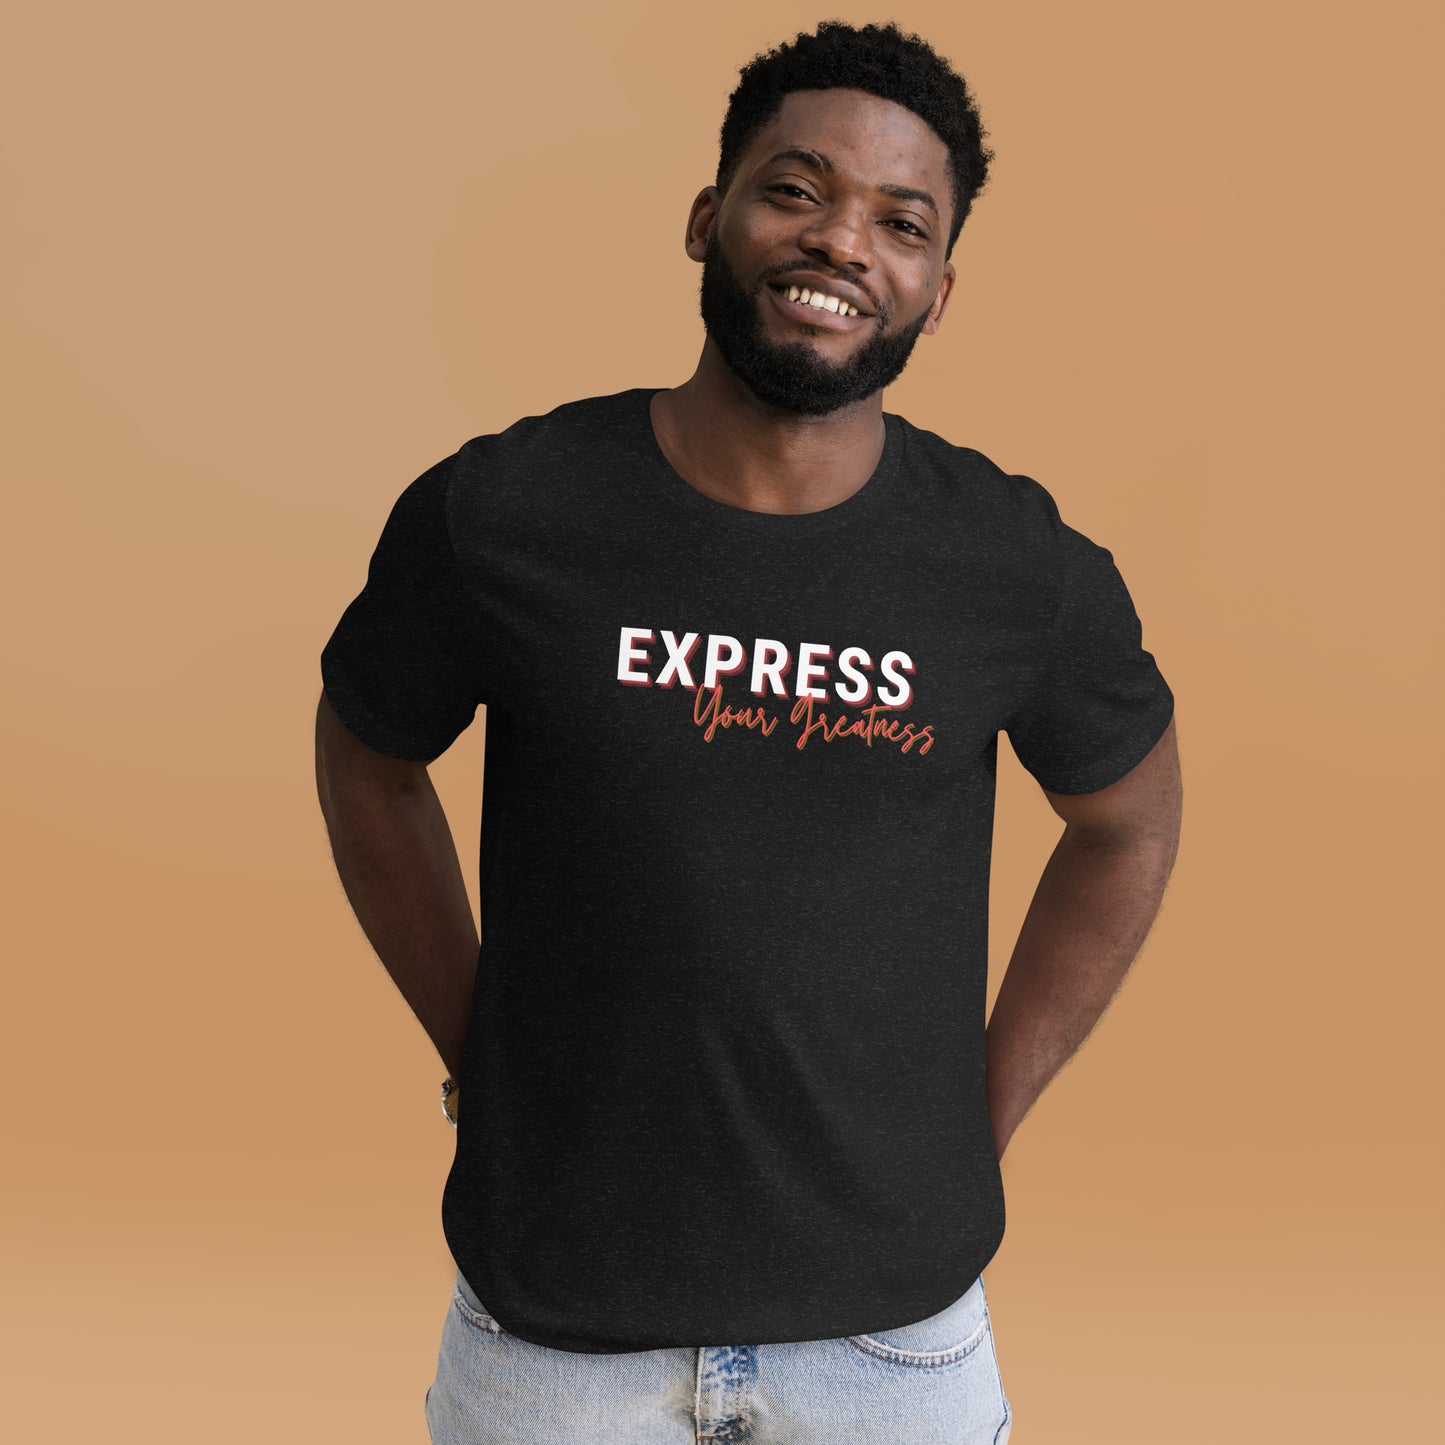 Express Your Greatness - Unisex t-shirt